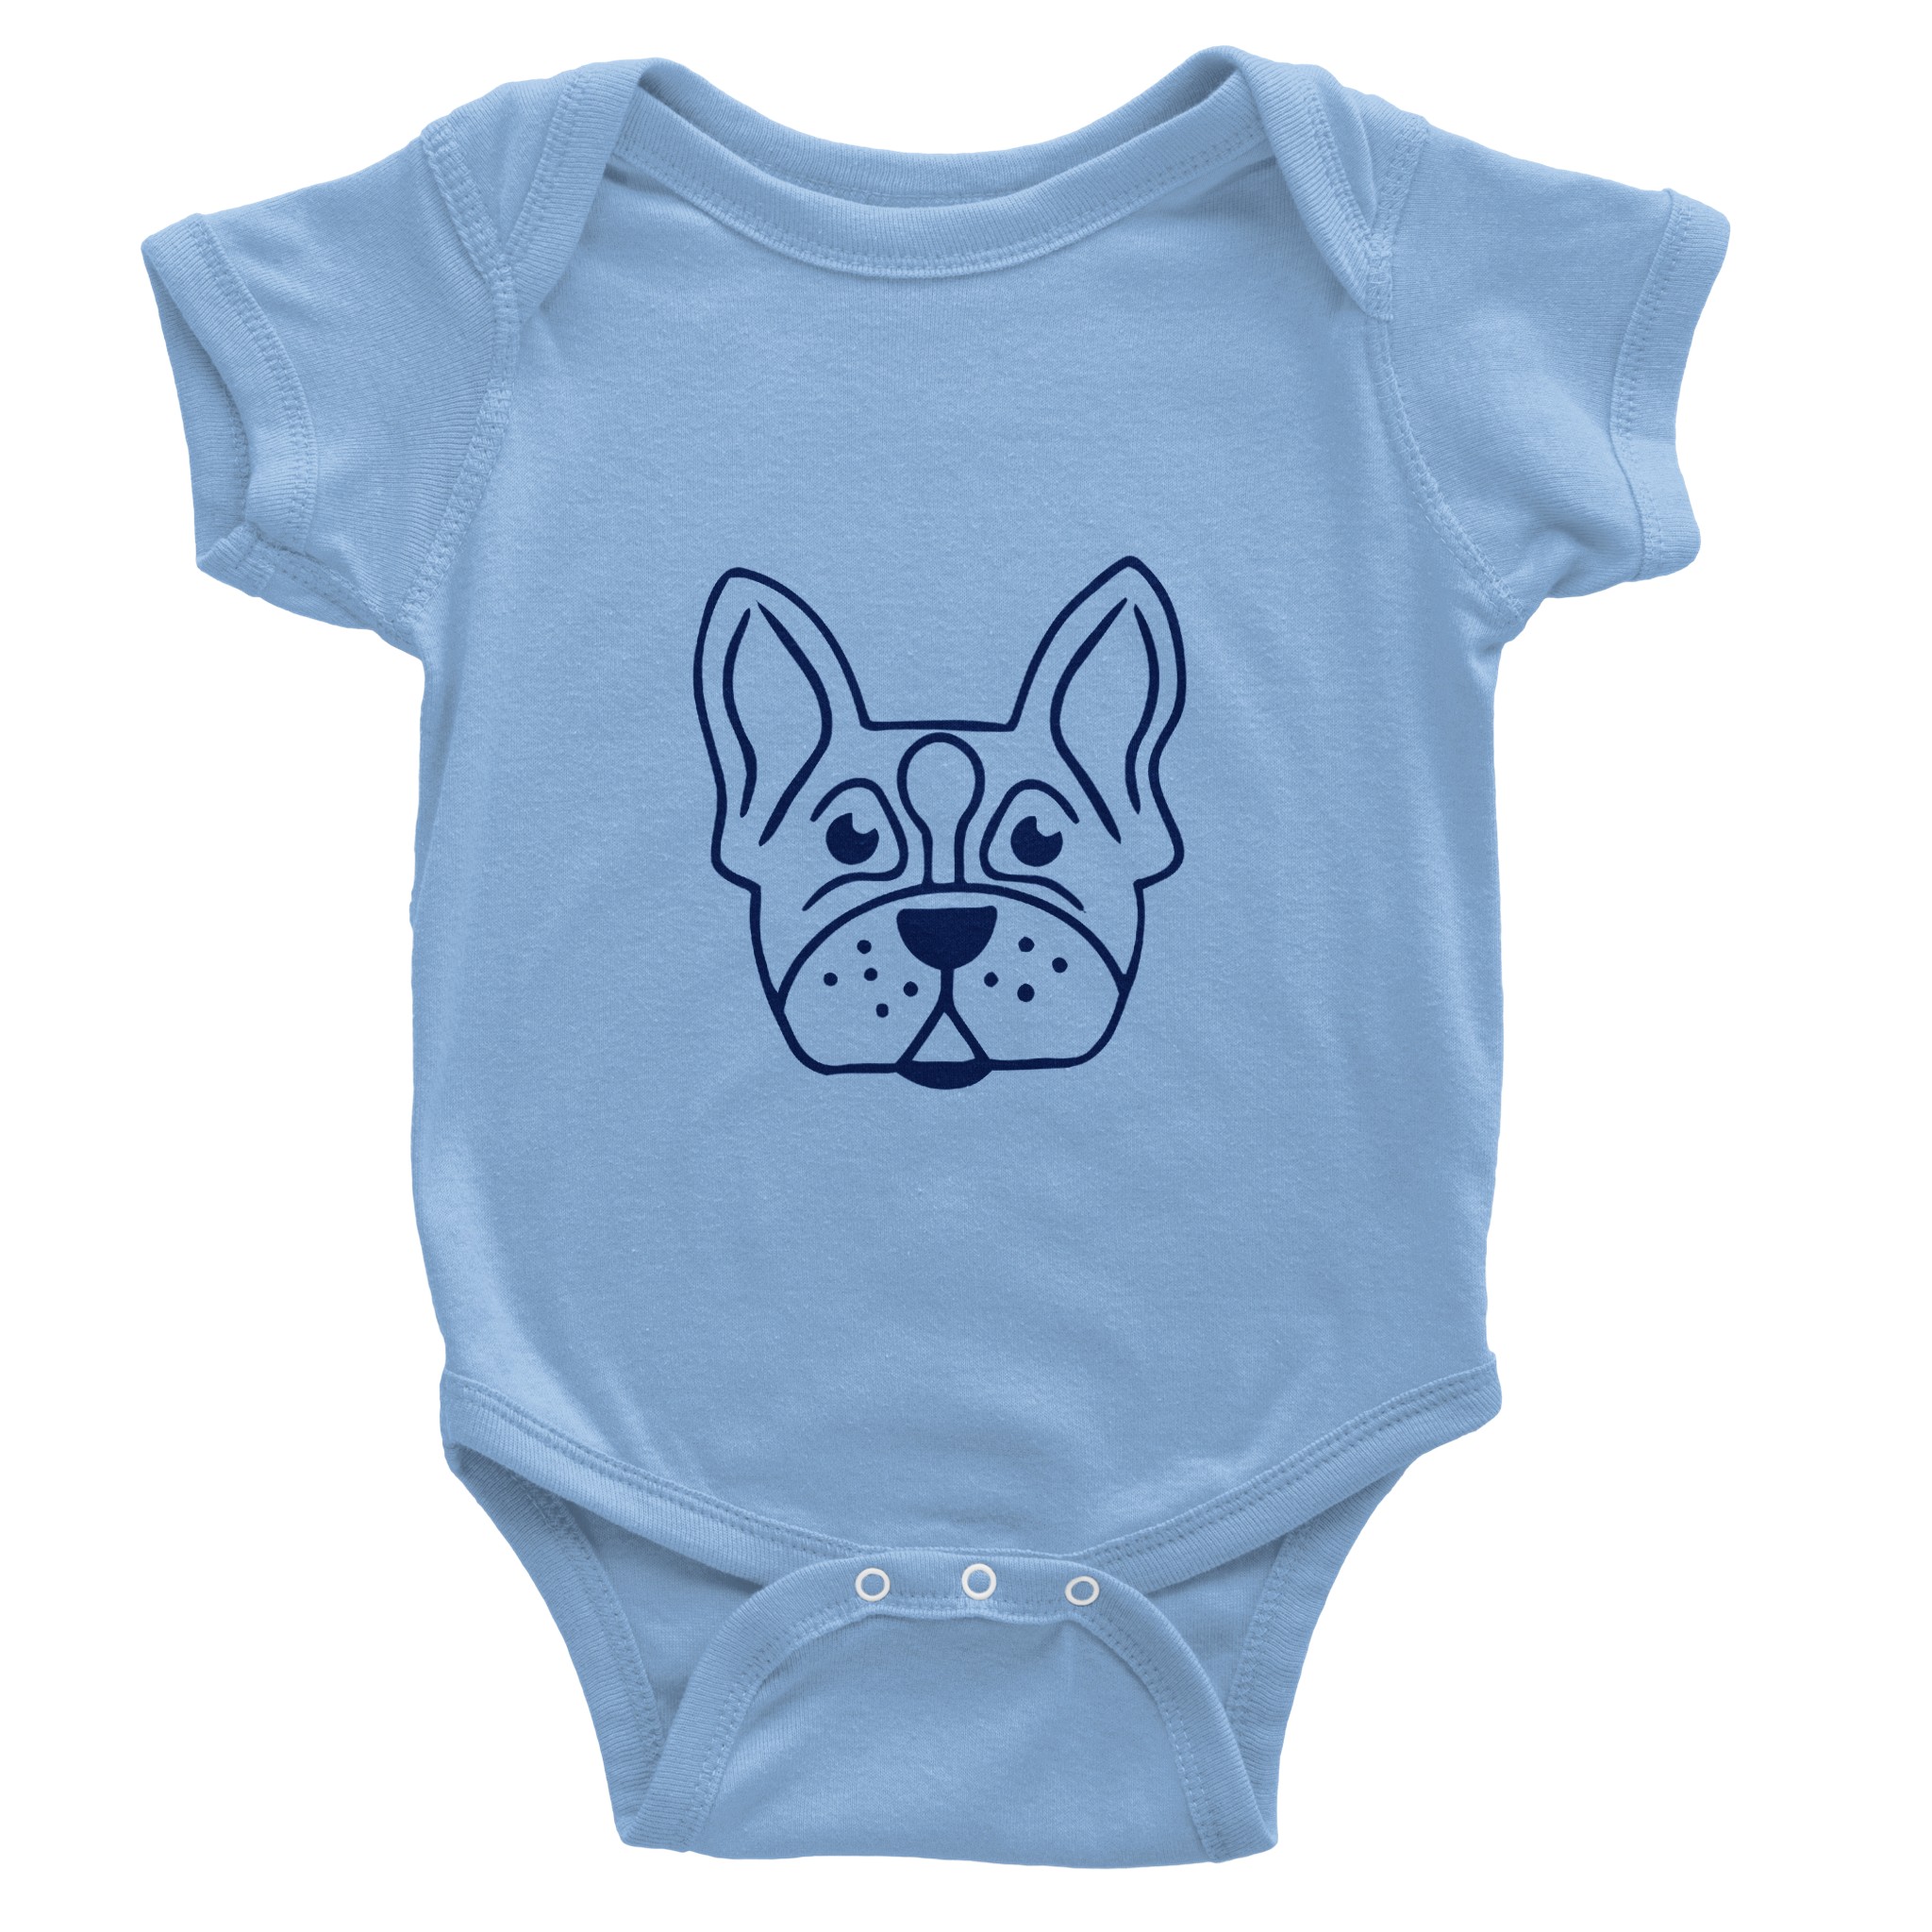 Classic Baby Short Sleeve Bodysuit with Dog face